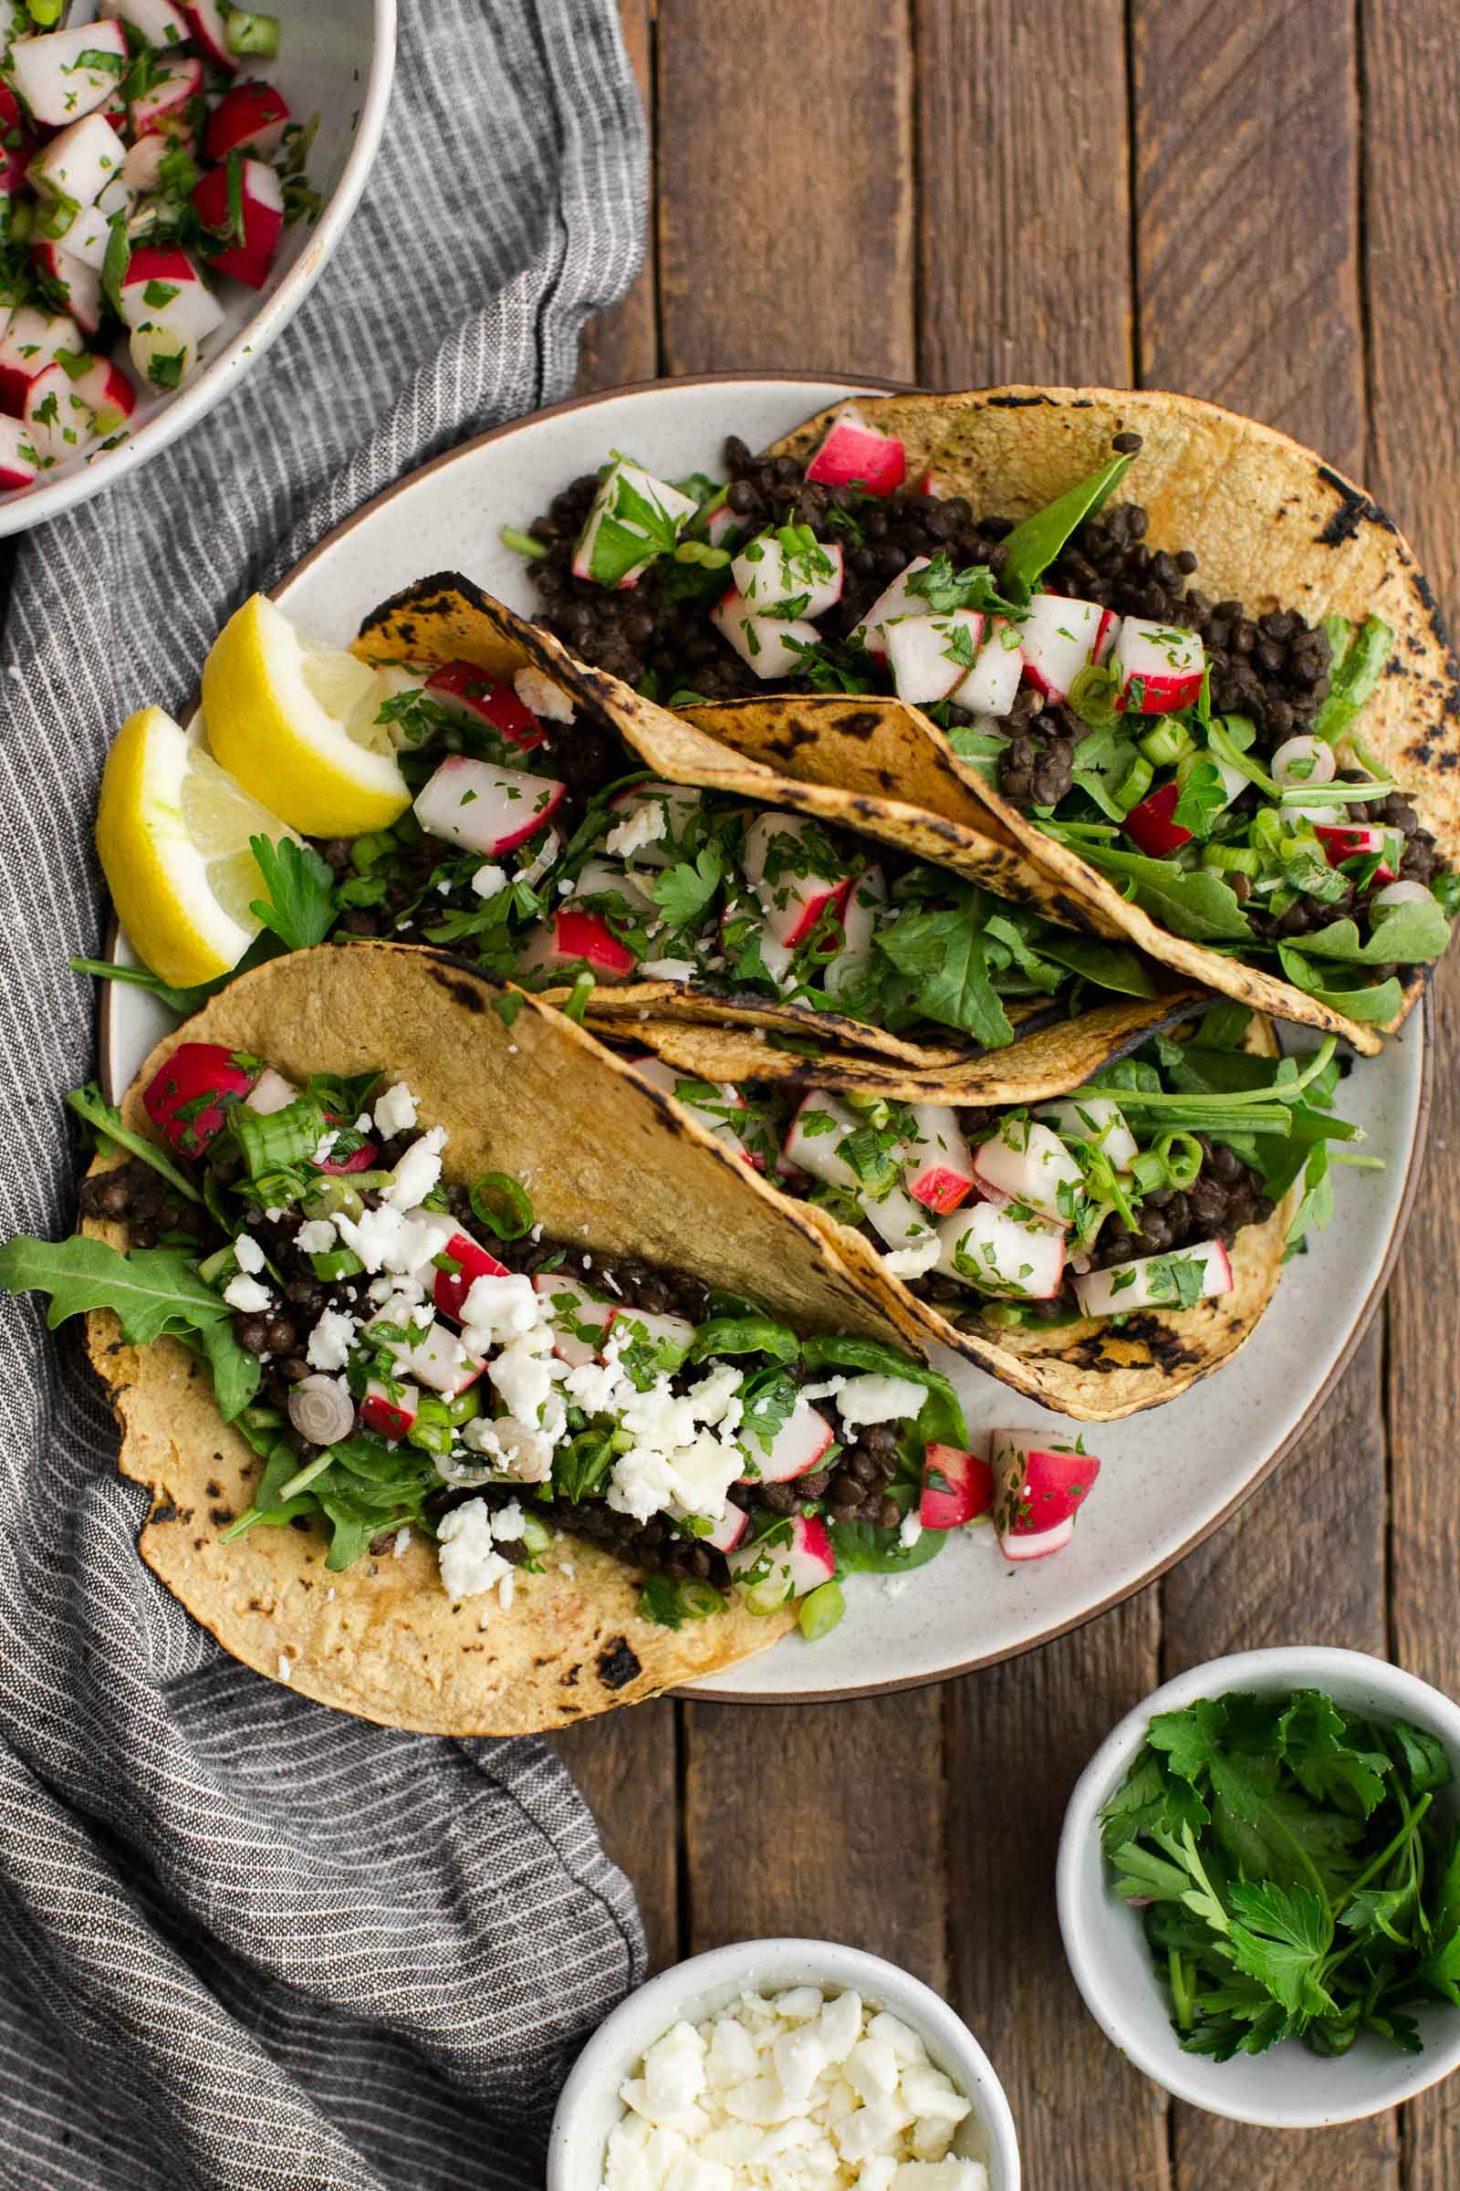 Spicy Lentil Tacos with Radish Salsa and Feta